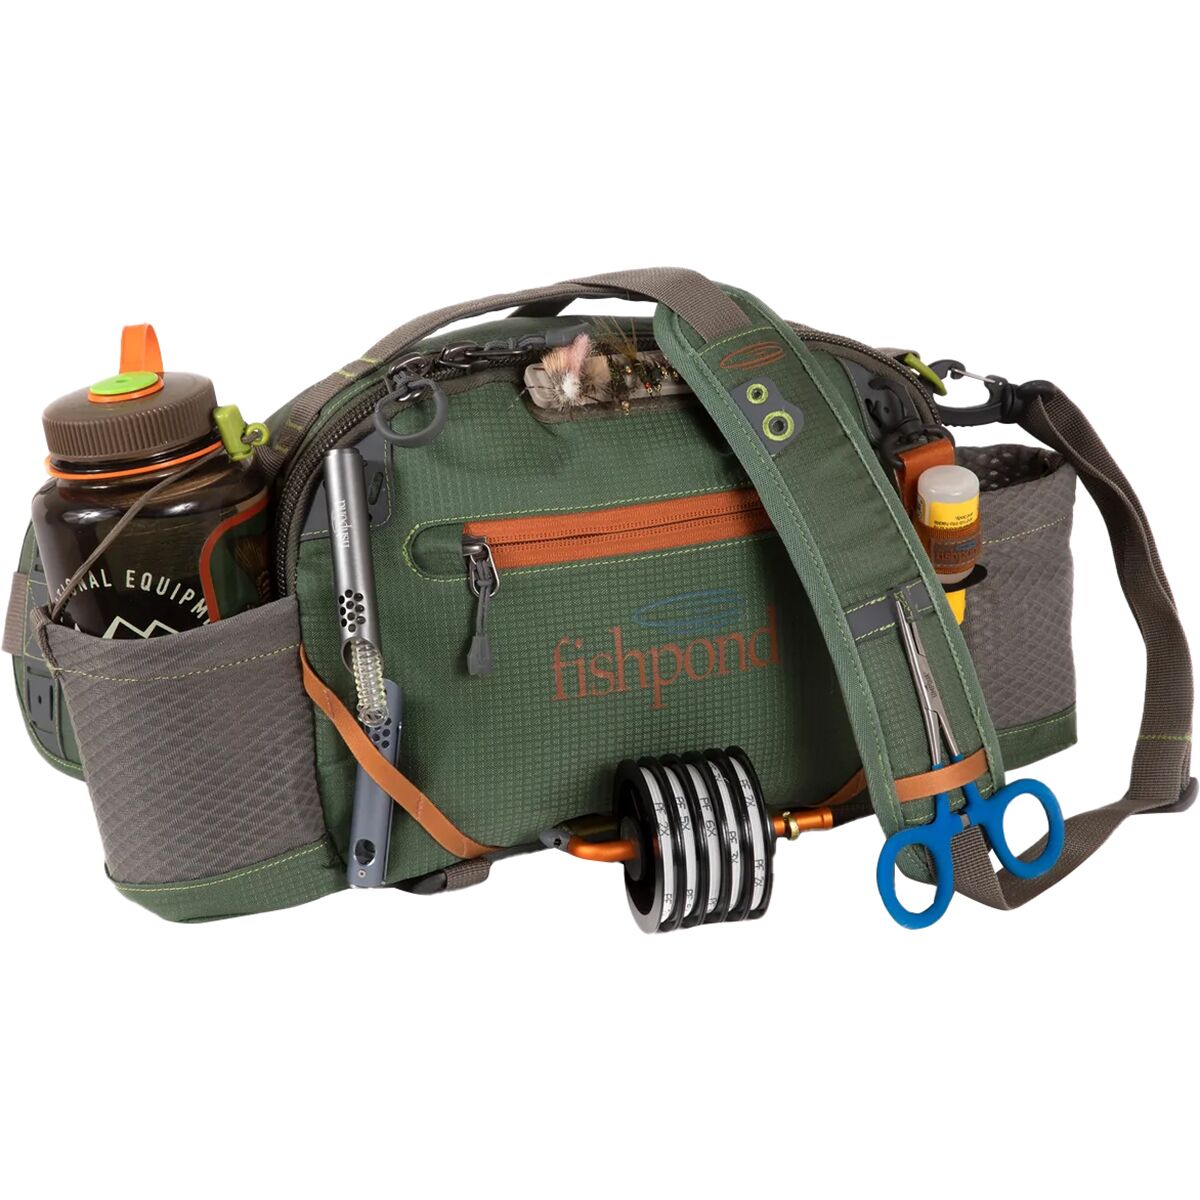 Fishpond Elkhorn Lumbar Pack Tortuga Fly Fishing Waist Pack with